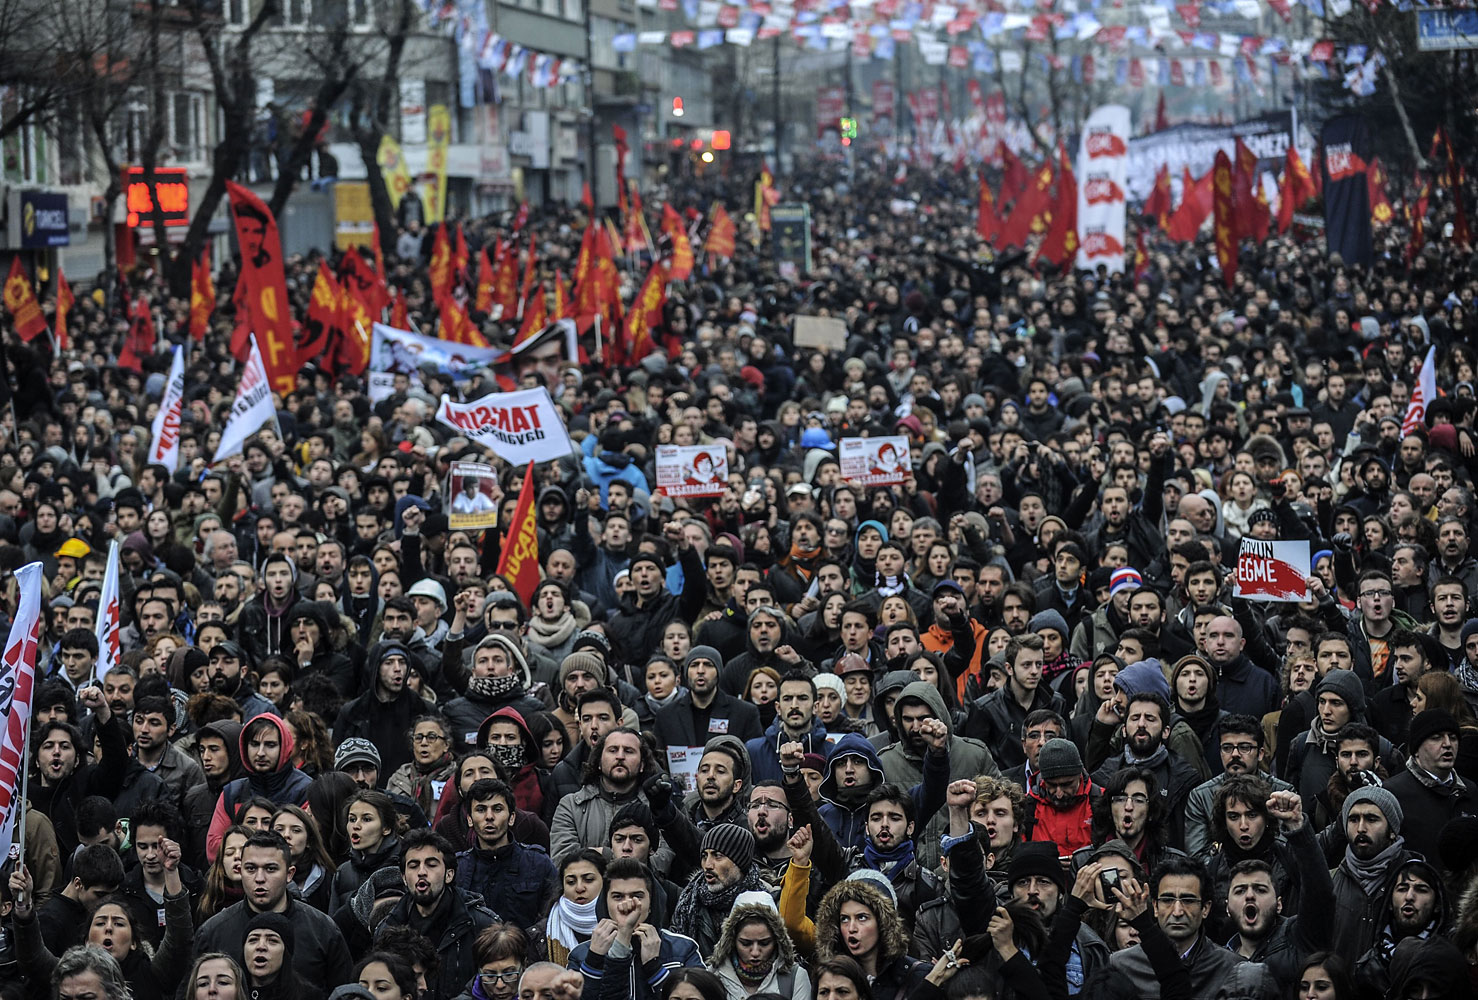 People gather for the funeral of Berkin Elvan, the 15-year-old boy who died from injuries suffered during last year's anti-government protests, in Istanbul on March 12, 2014.